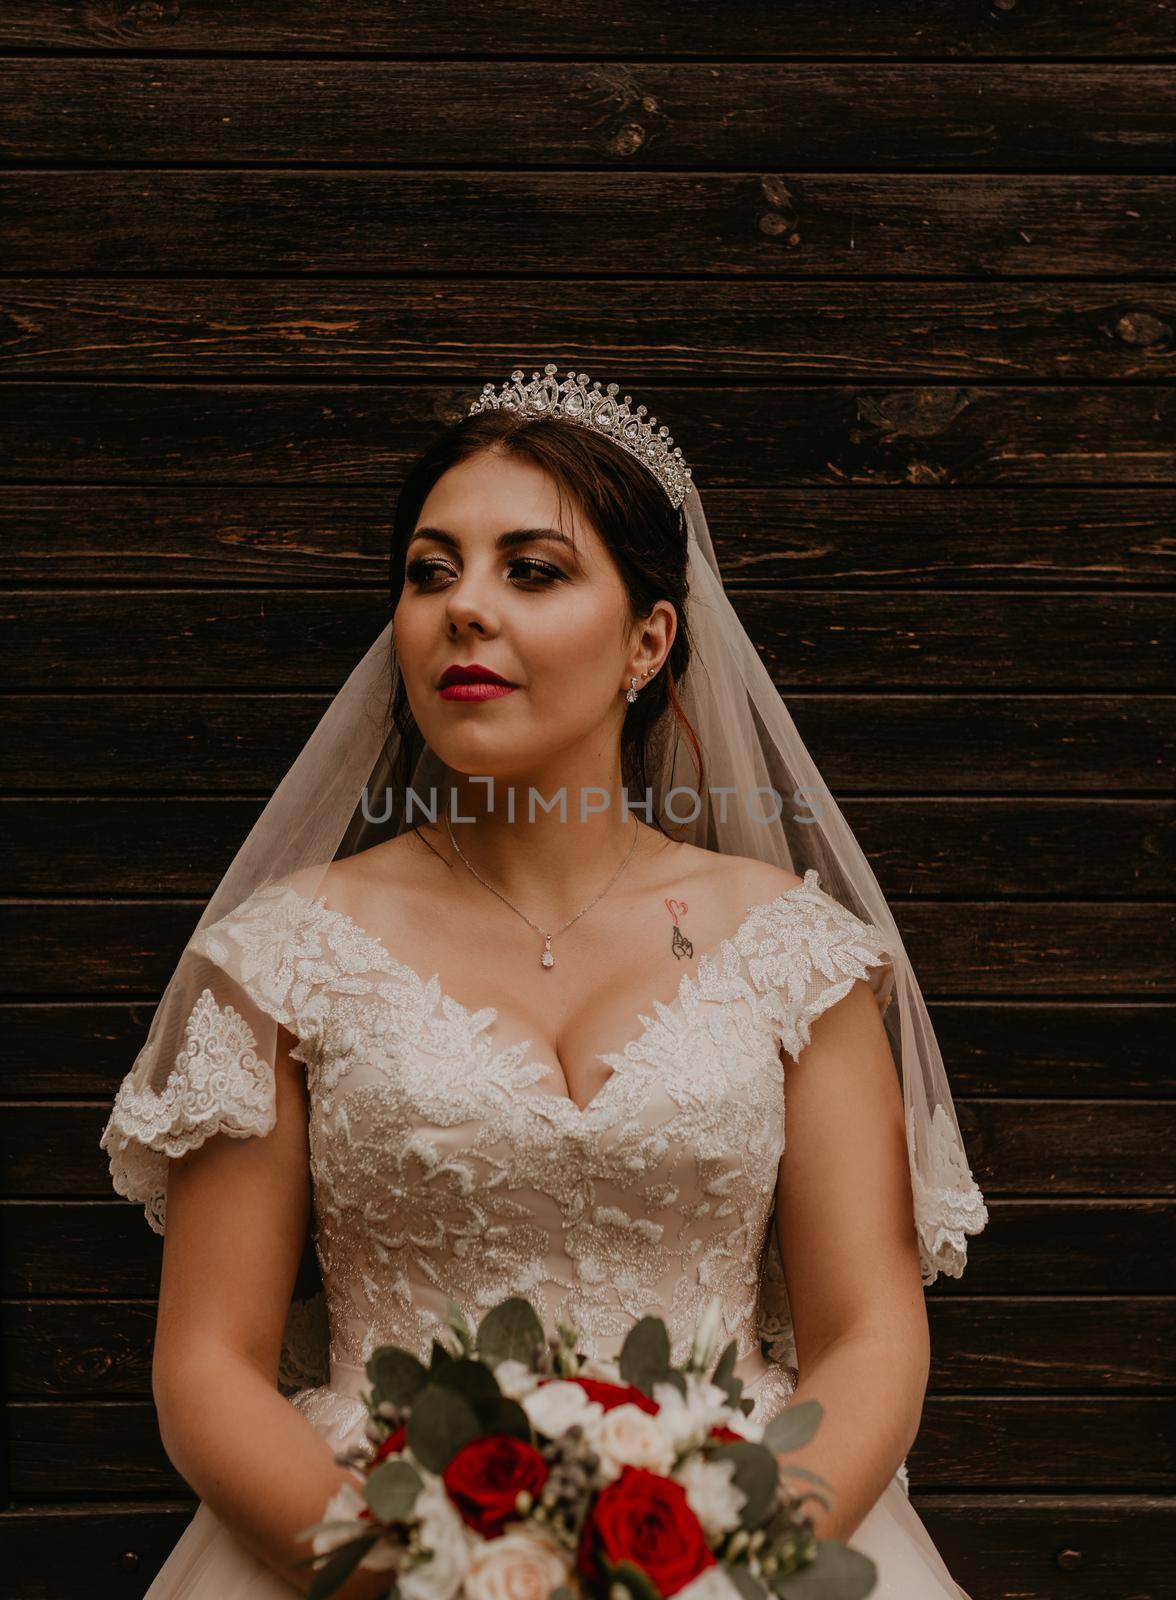 European Caucasian young black-haired woman bride in white wedding dress with long veil and tiara on head. girl holding her bouquet of flowers in hands. dark brown wooden background with planks